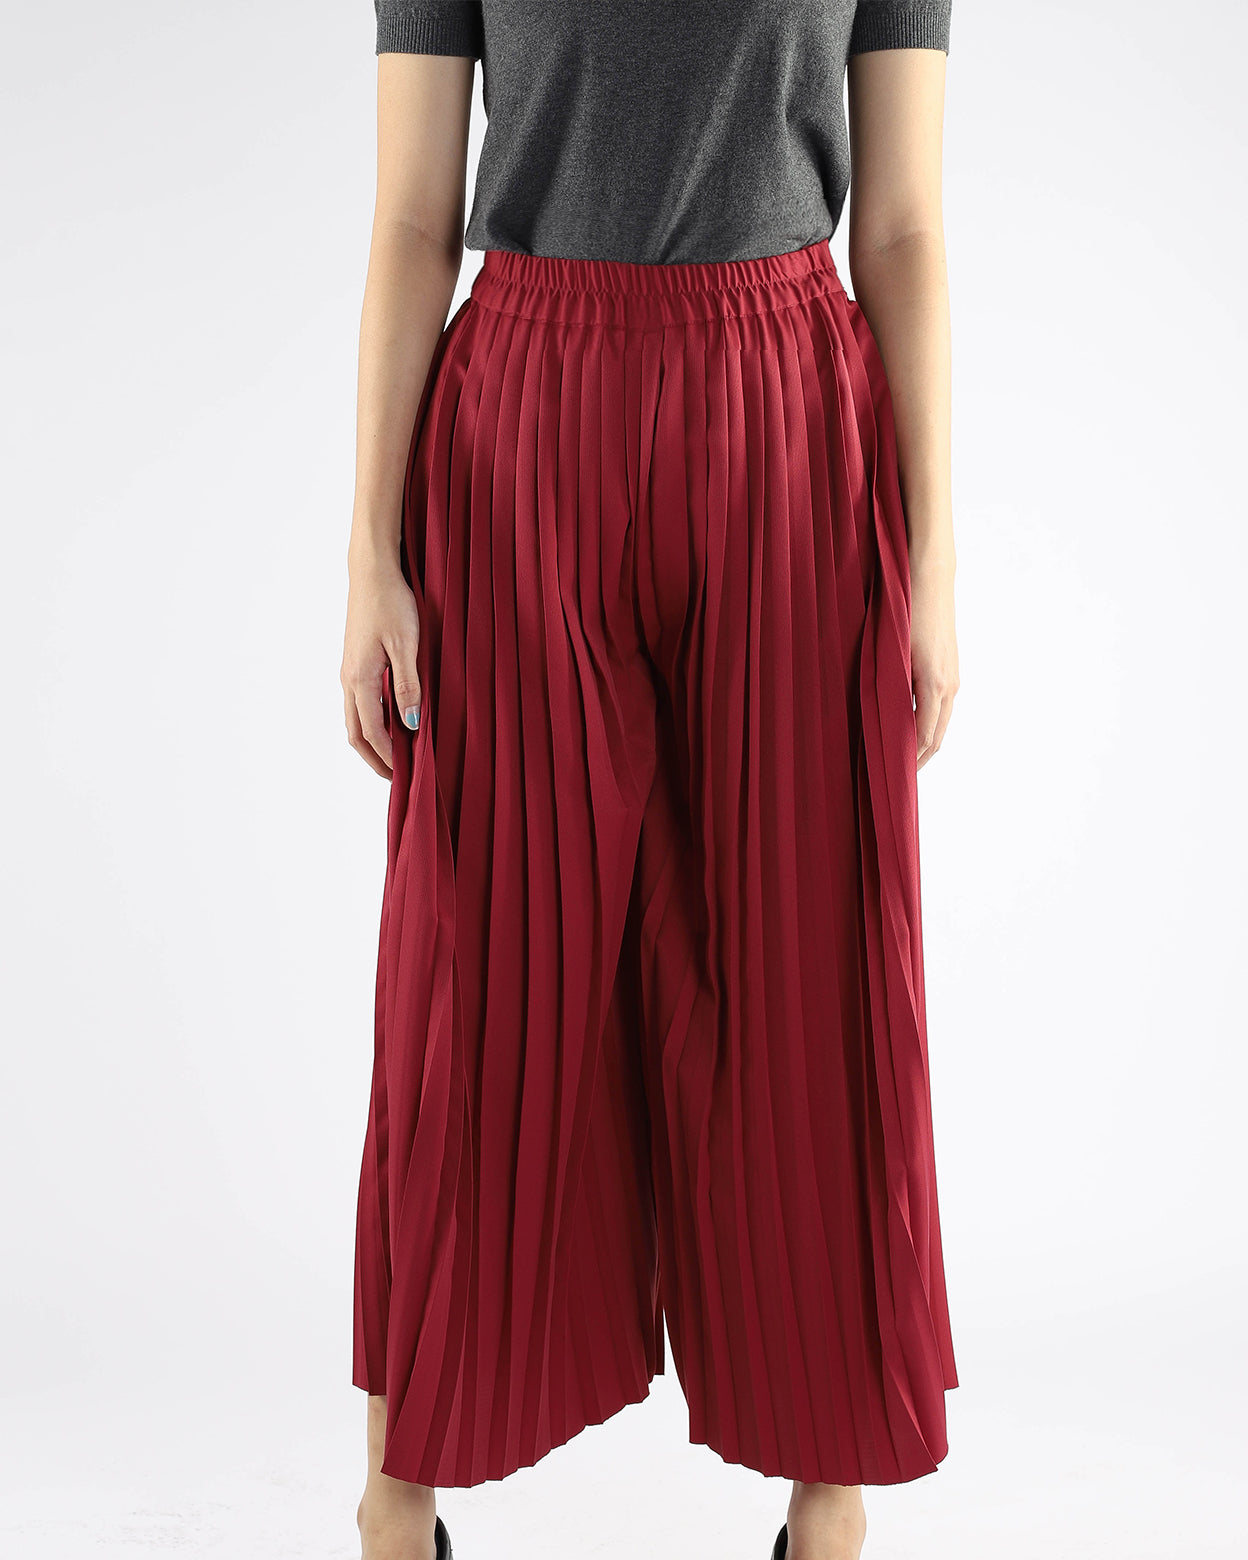 5 Smart Reasons to Try a Palazzo Pants This Summer  Posh in Progress